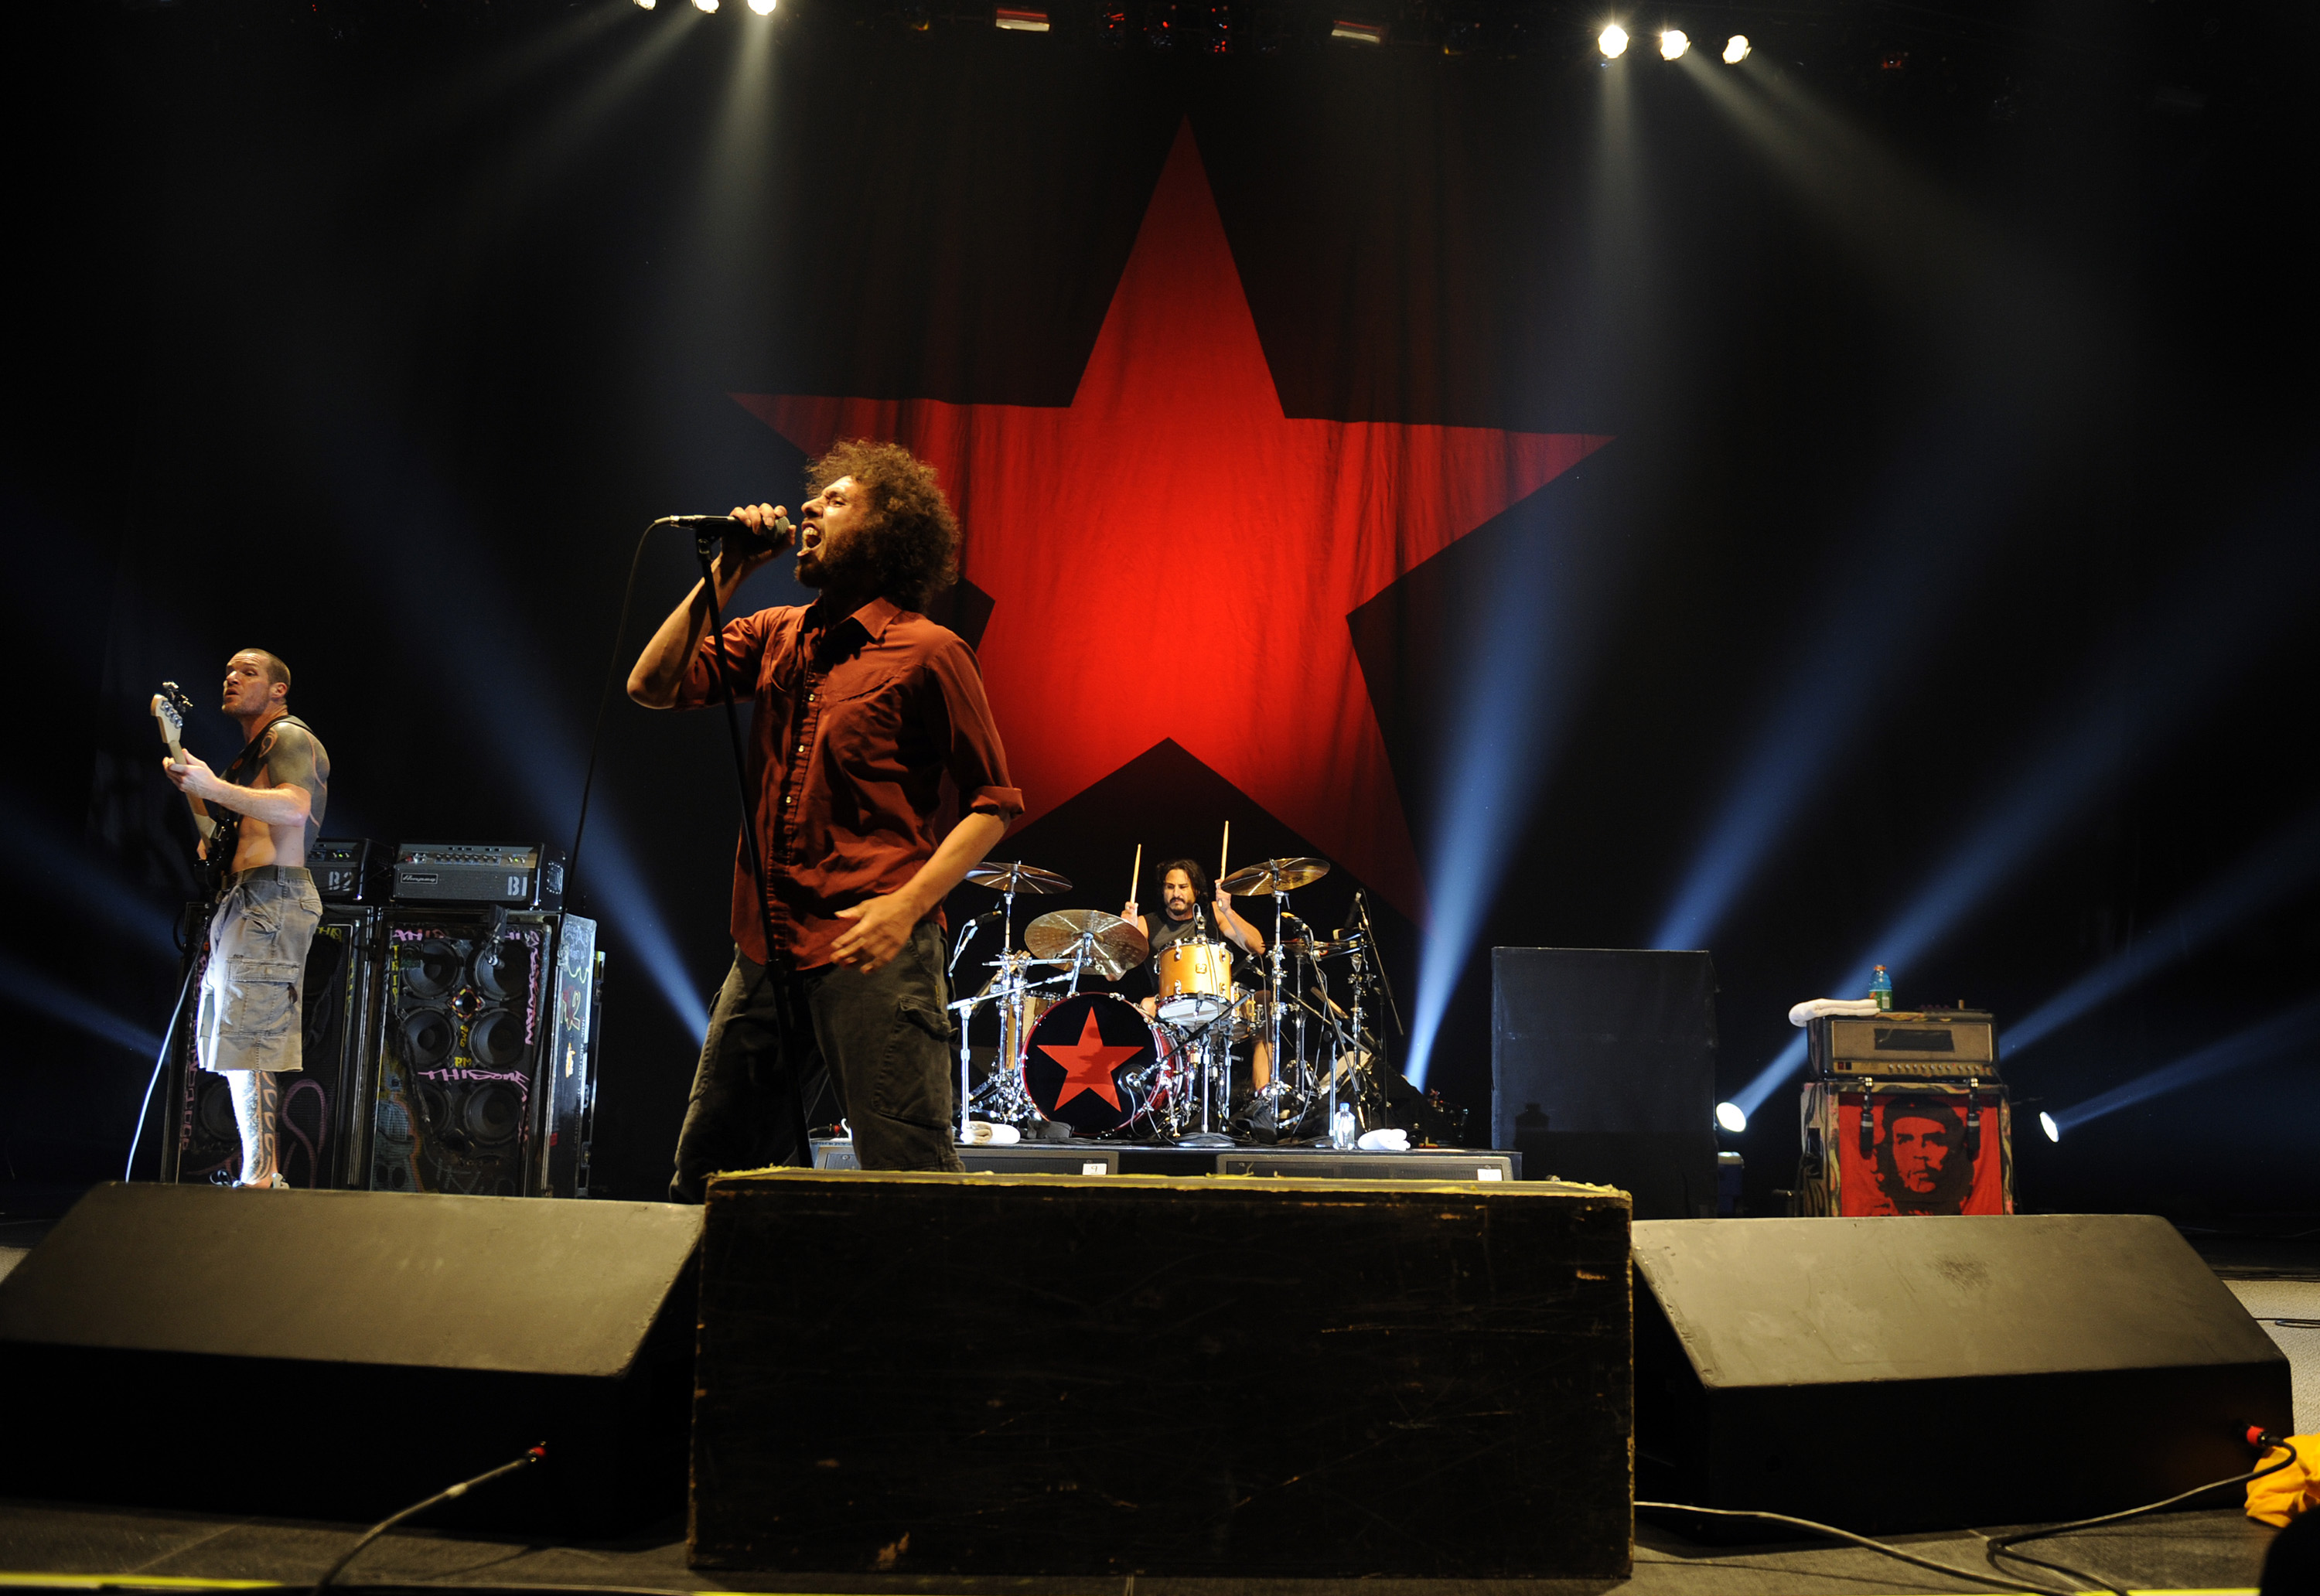 rage against the machine wallpaper,performance,entertainment,stage,music,performing arts